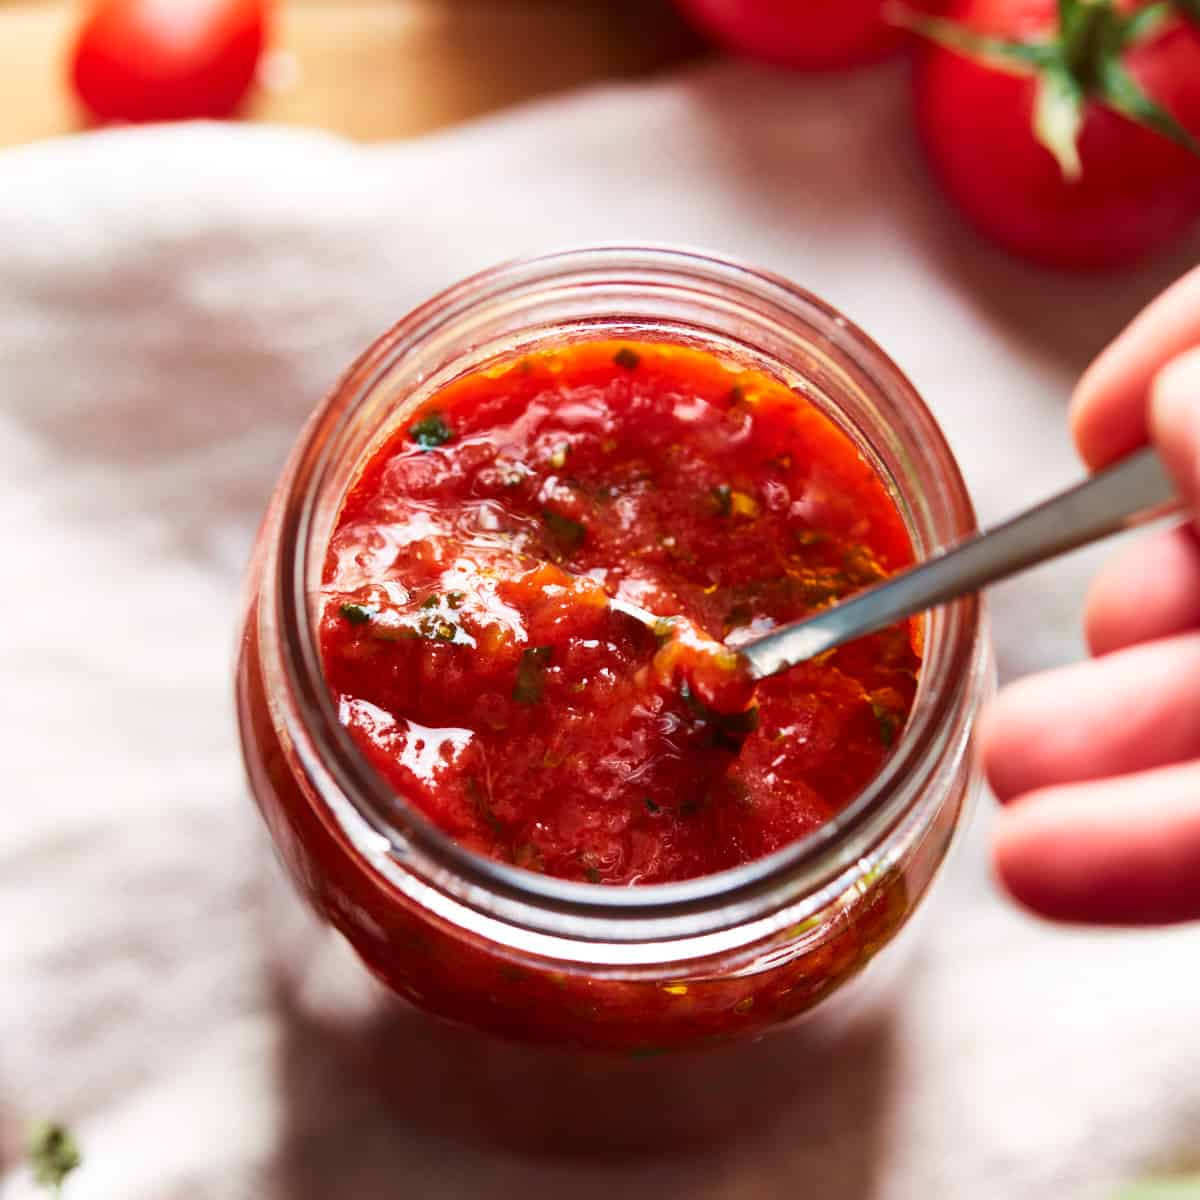 Spooning some pizza sauce out of a jar